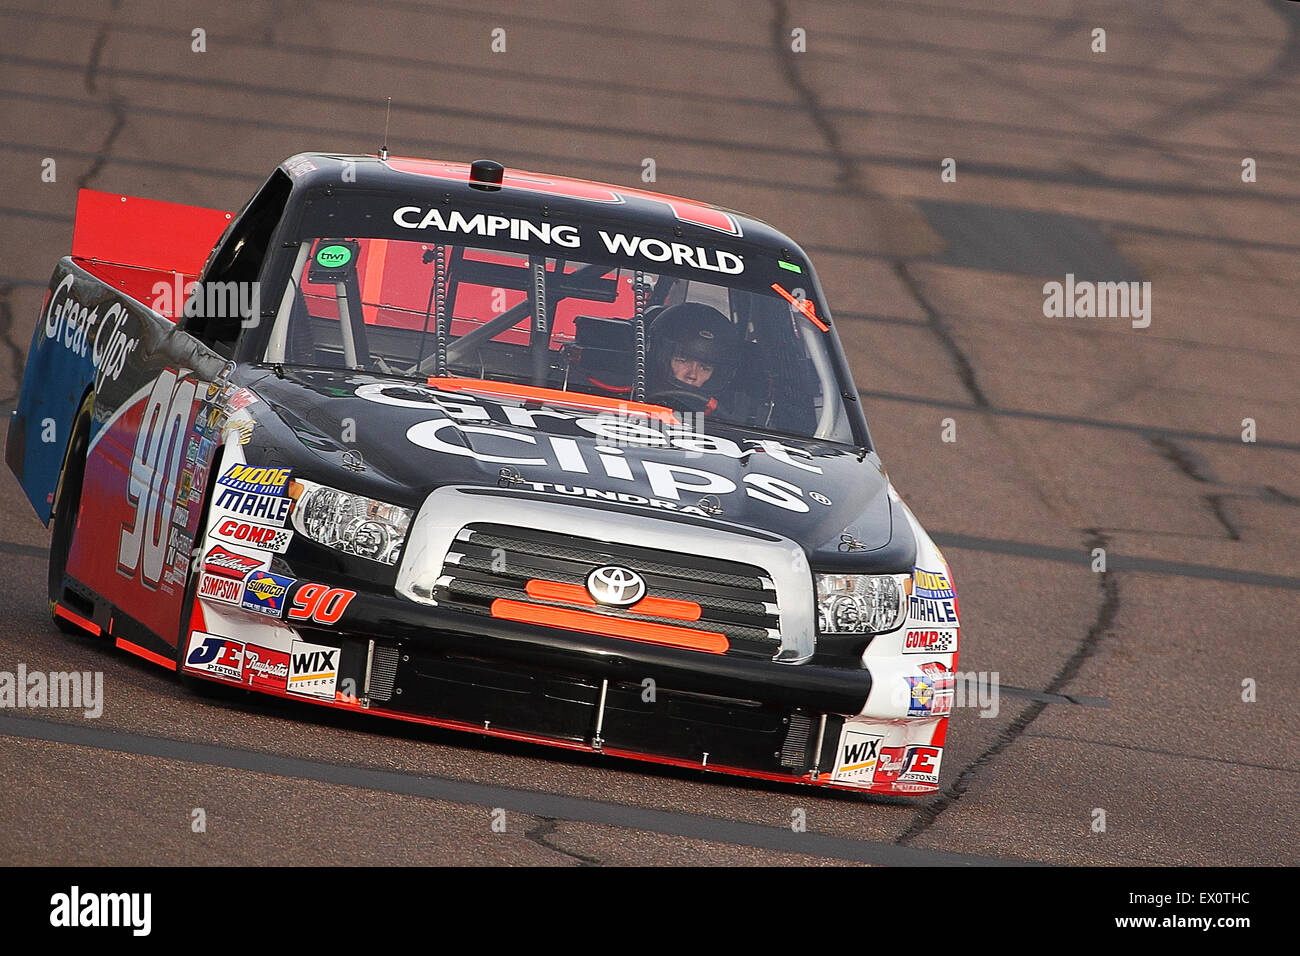 AVONDALE, AZ - NOV. 12: Brad Sweet (90) takes laps in a practice session for the NASCAR Camping World Truck Series Stock Photo